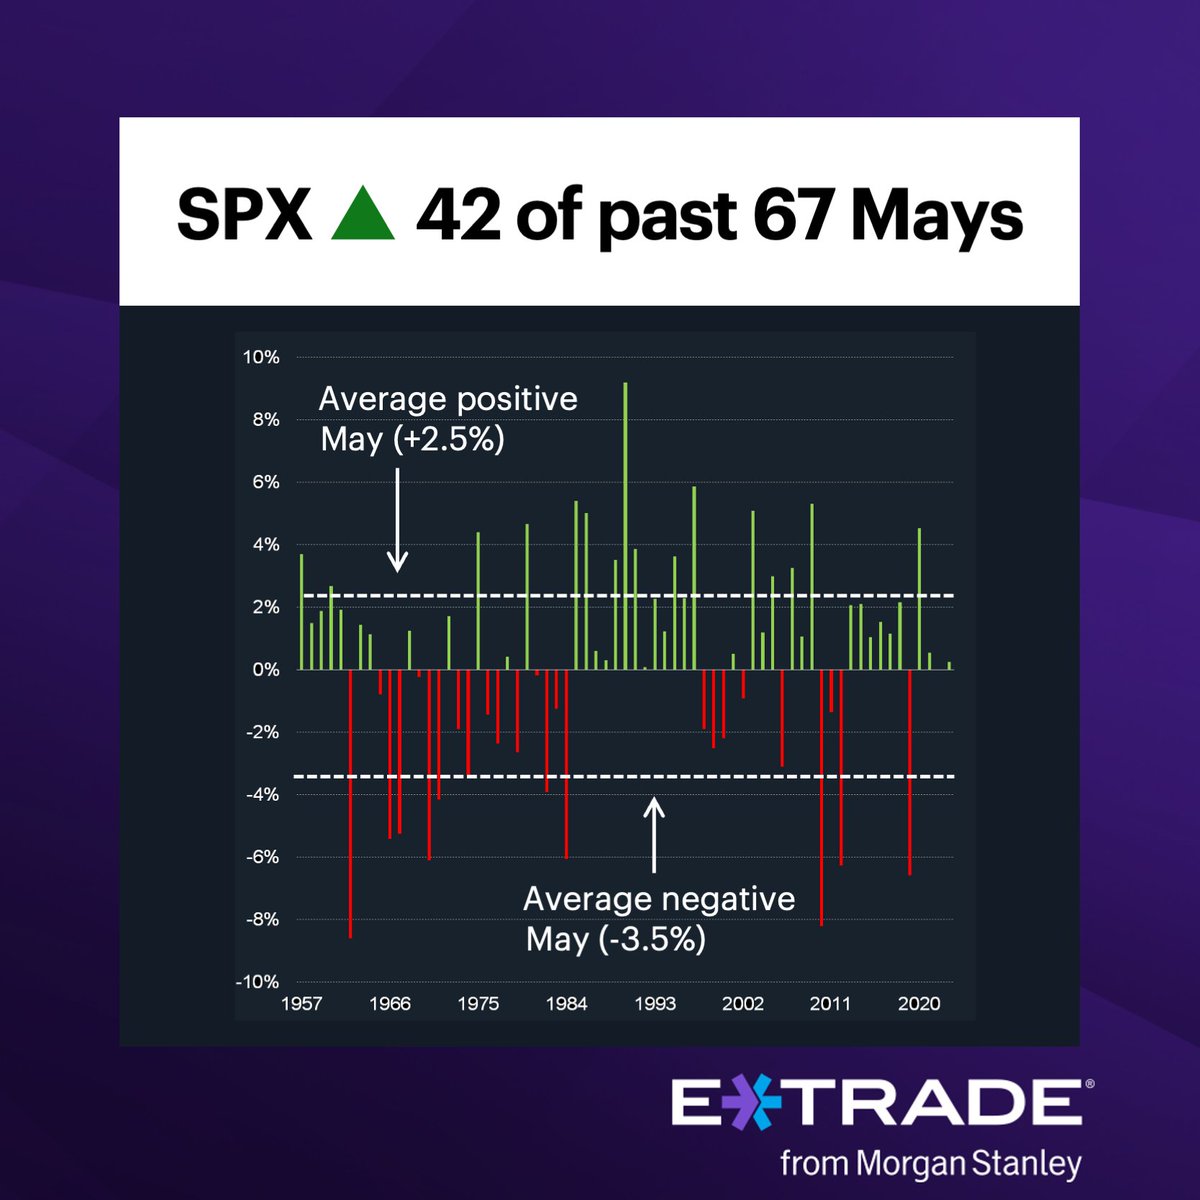 #ActiveTrader: Find out what the stock market has done in May after Aprils like the one that just ended. bit.ly/3QtRh9w